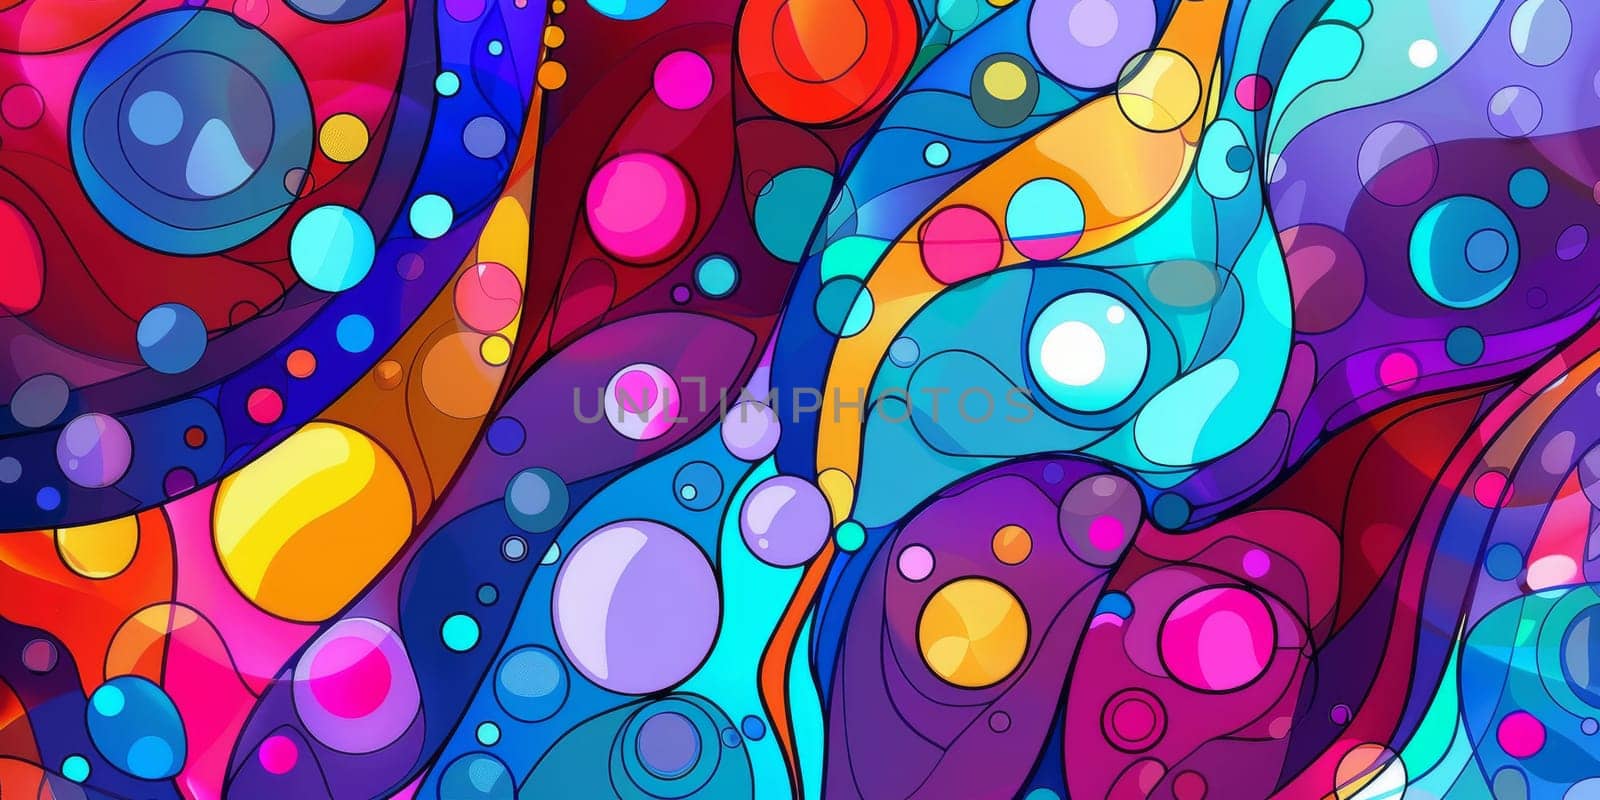 Abstract painting featuring a vibrant colors and numerous bubbles by Kadula